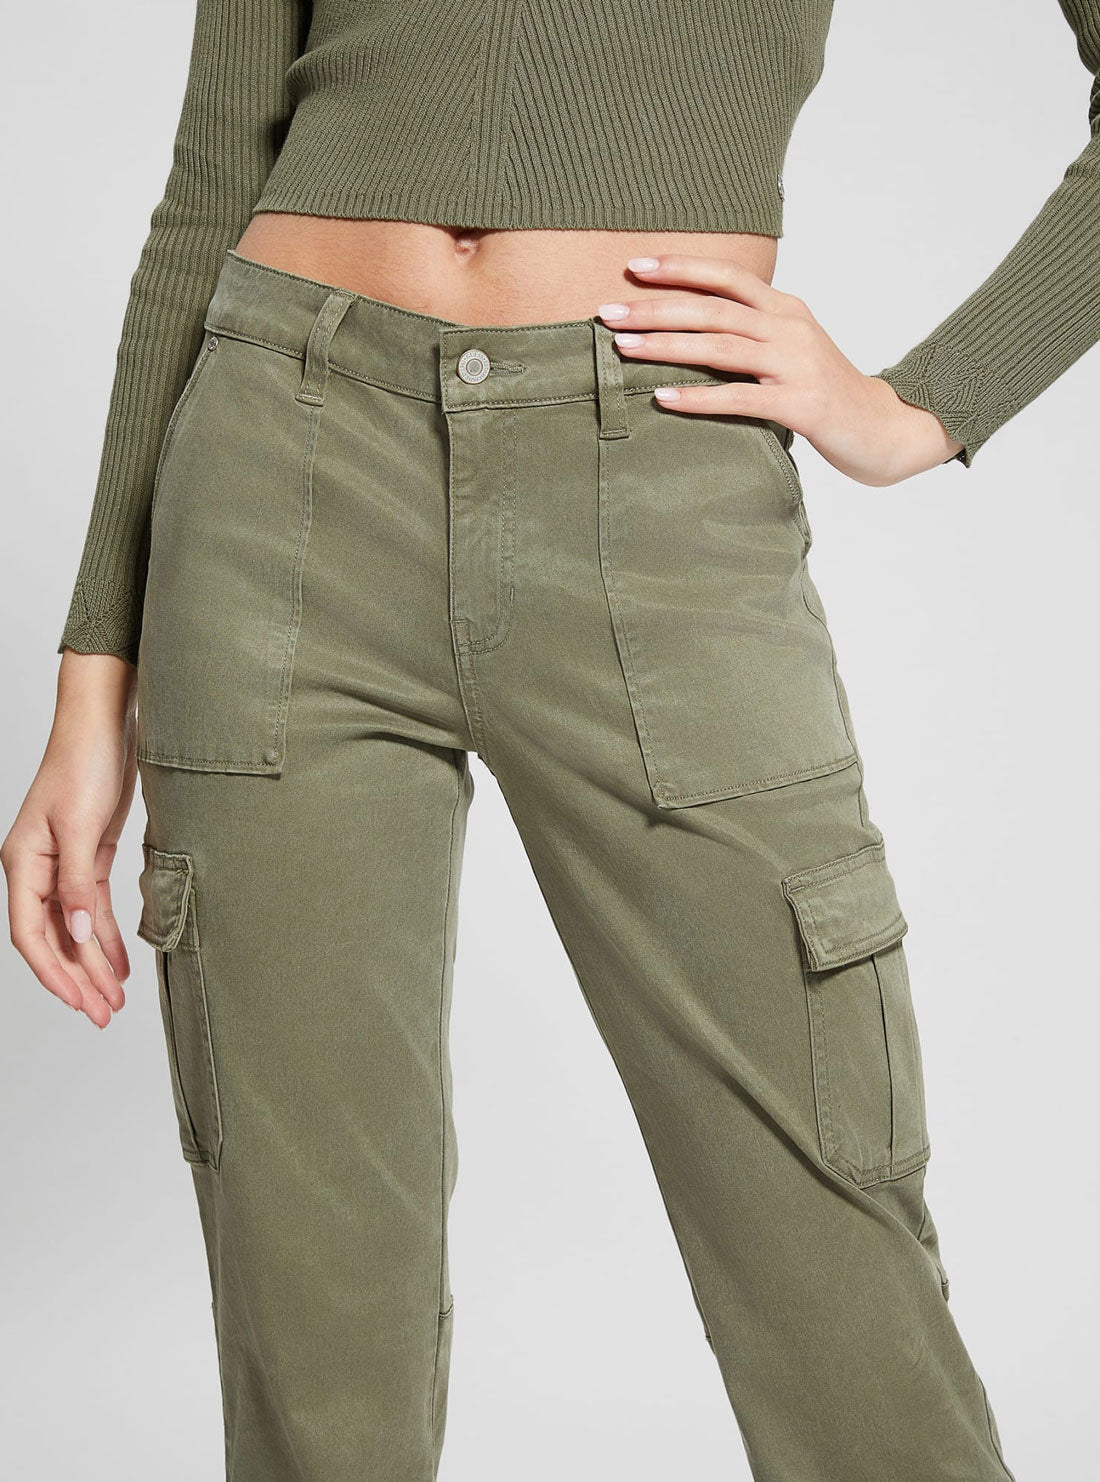 GUESS Green Straight-Leg Cargo Pants front view